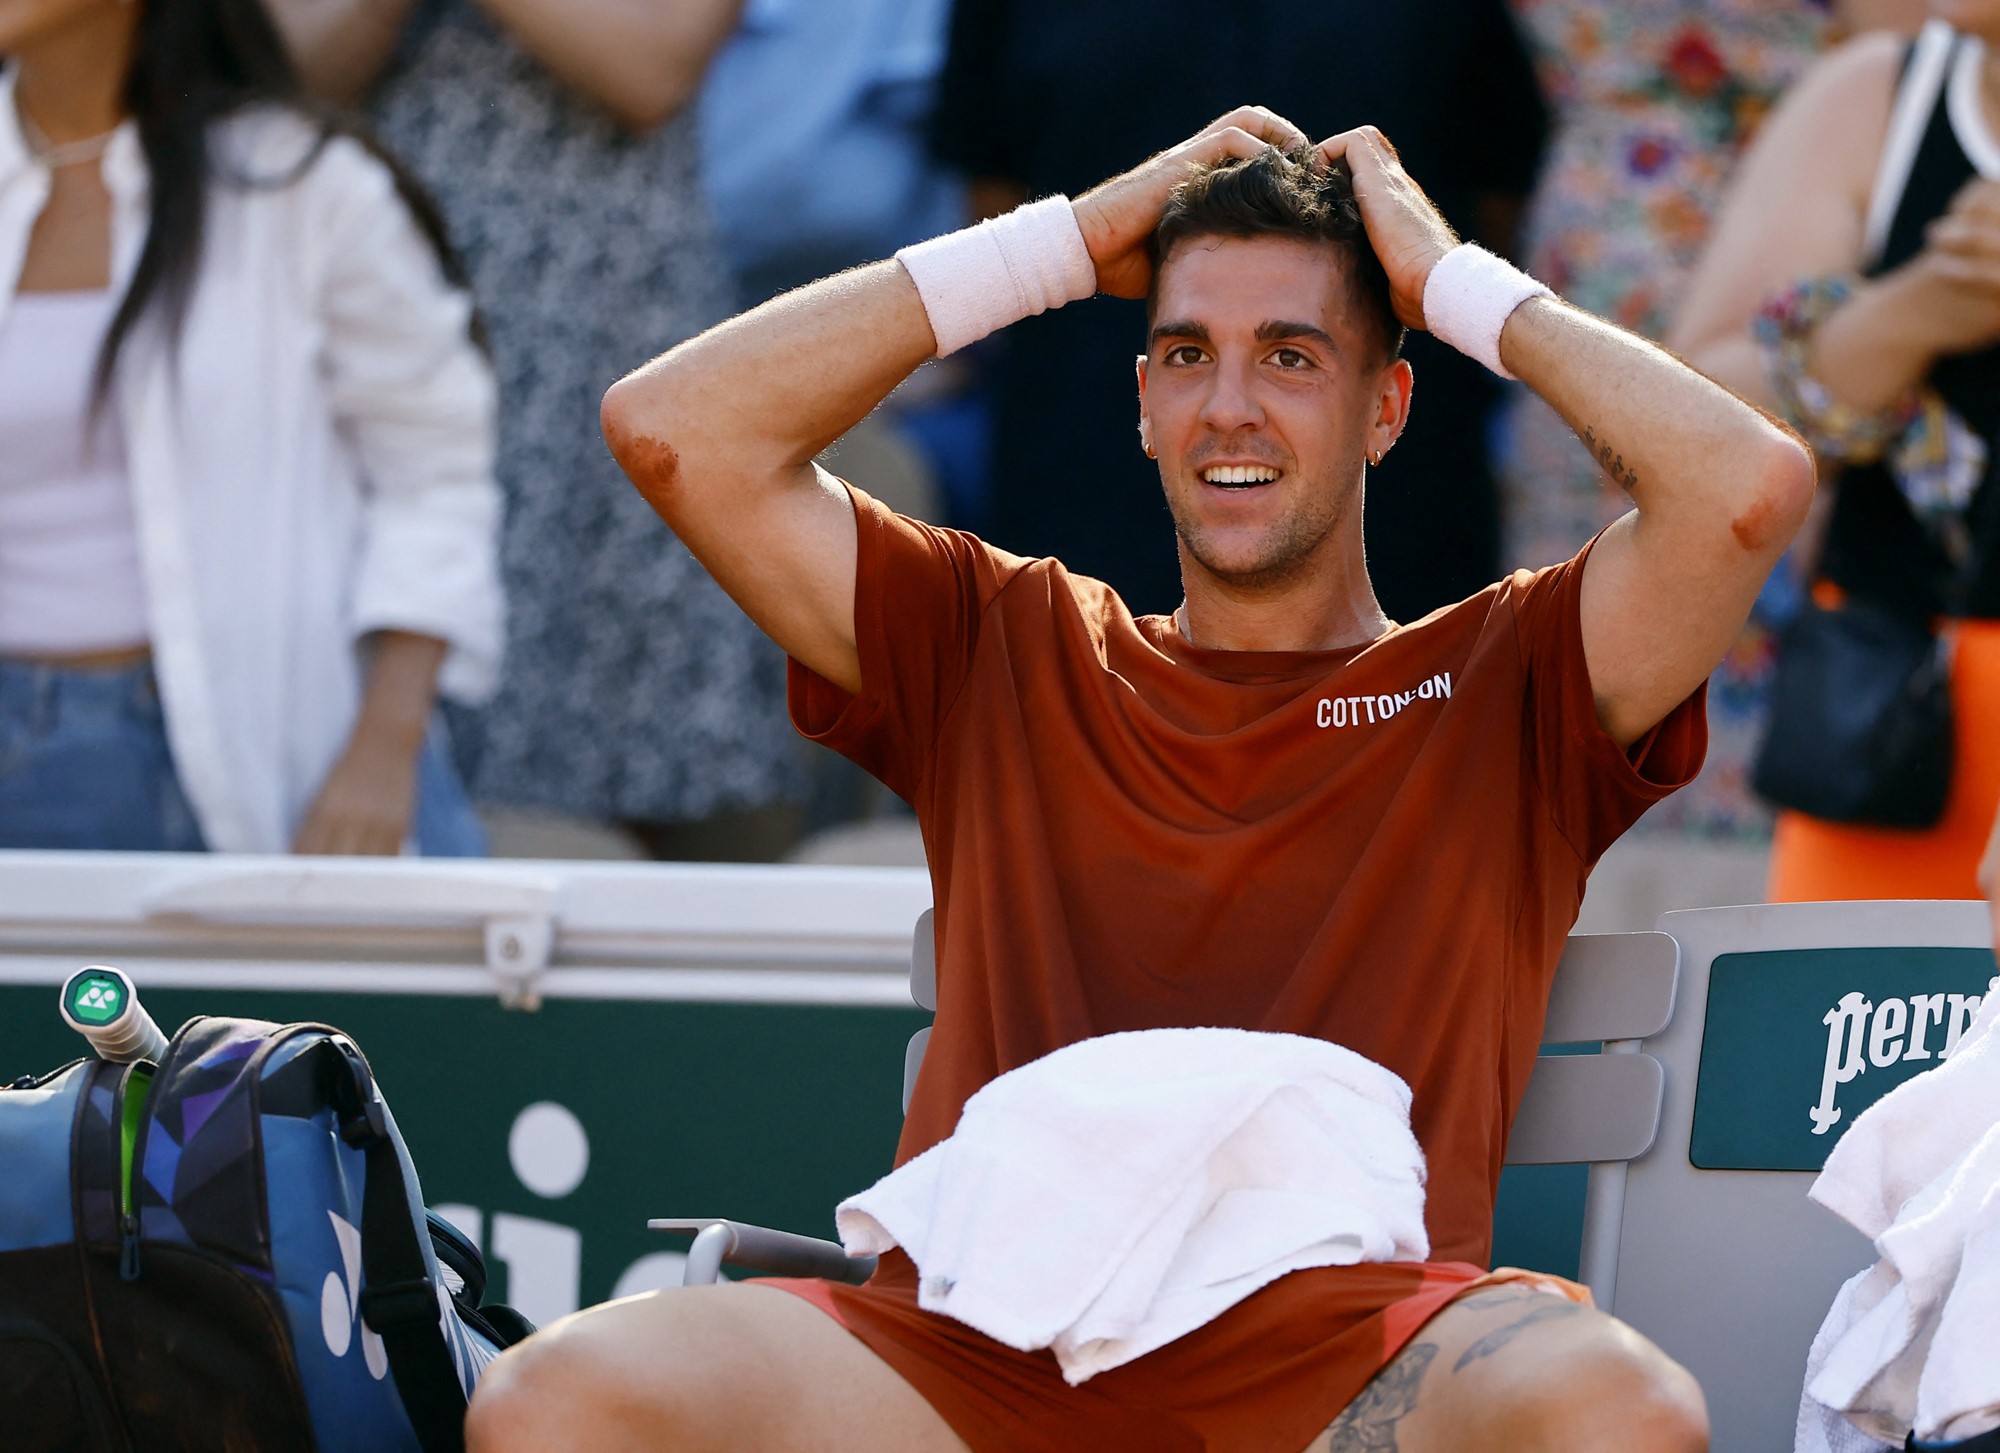 A male tennis player sits courtside after a game with his hands on his head and smiles